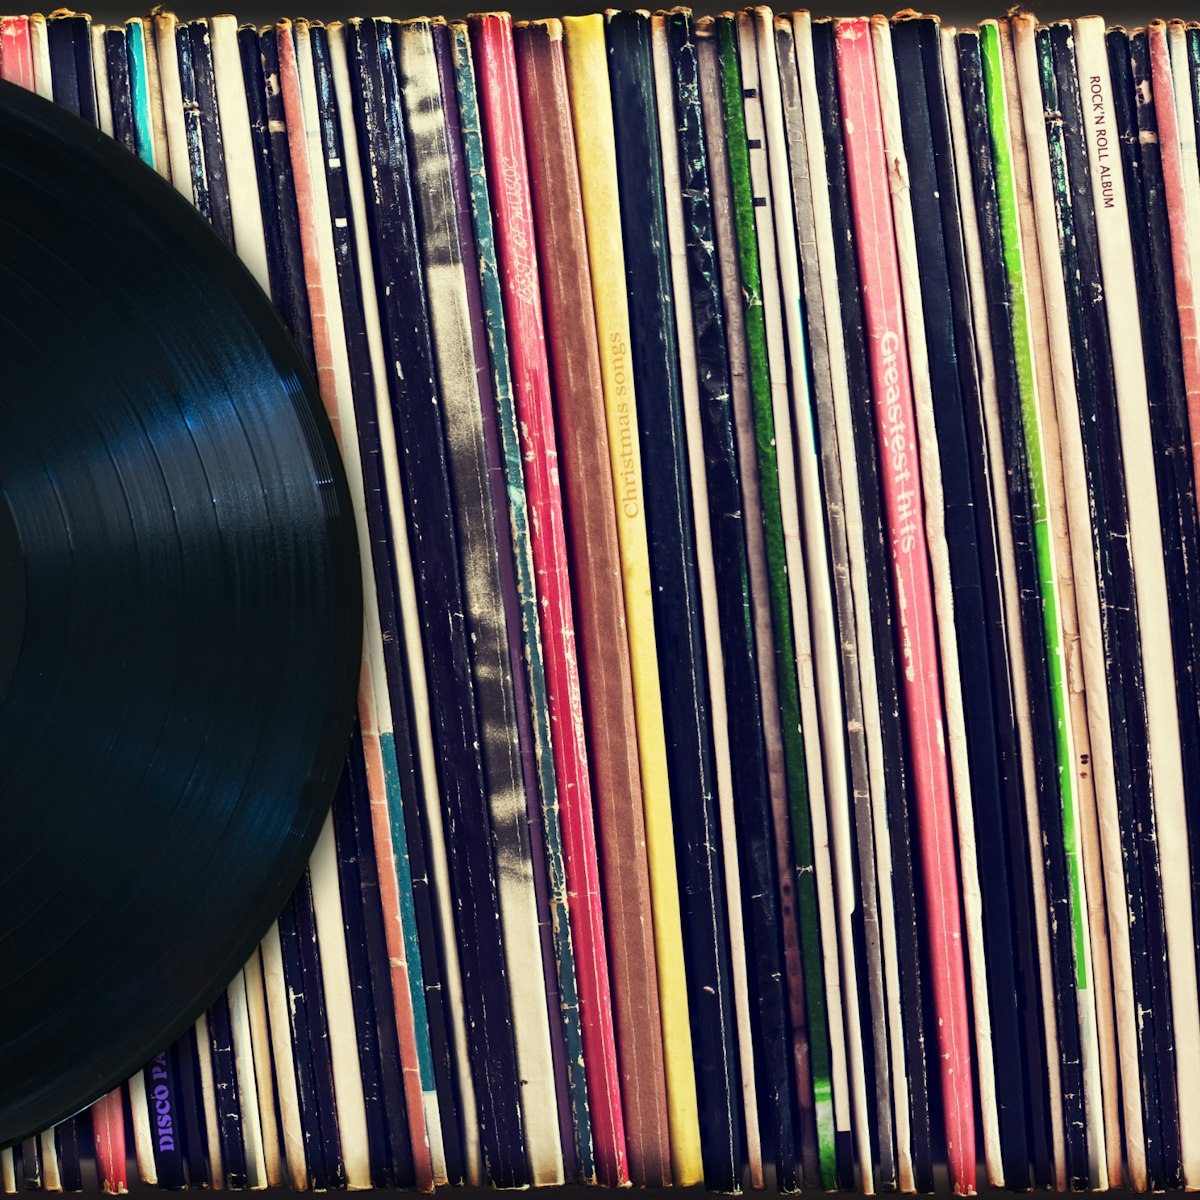 500px Photo ID: 115969675 - Vinyl record with copy space in front of a collection of albums (dummy titles), vintage process